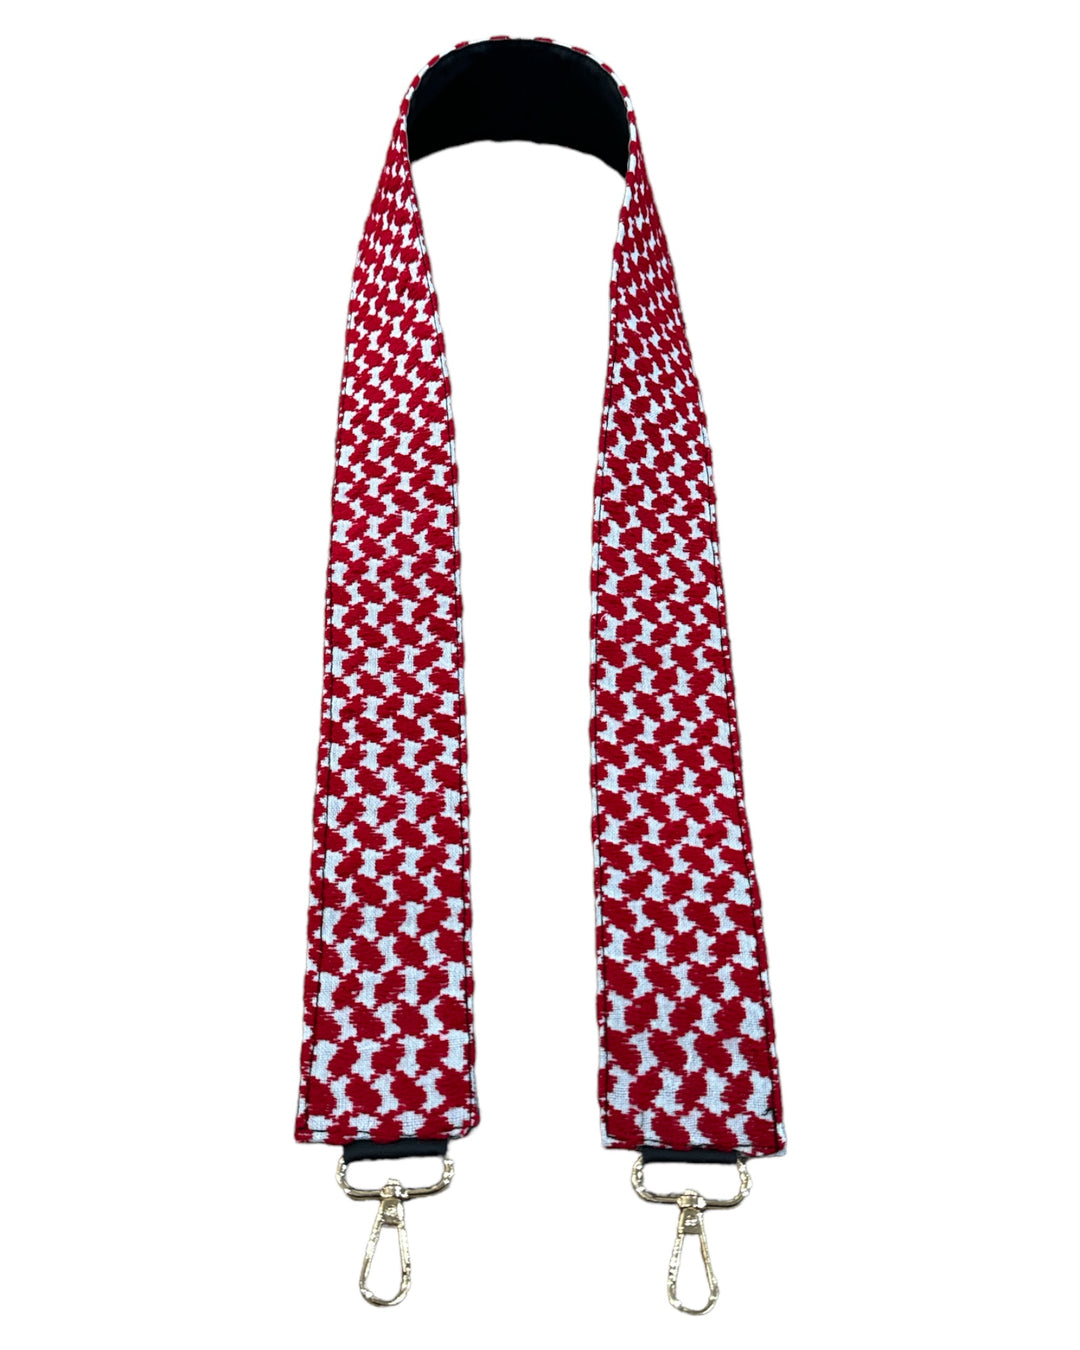 Keffiyeh Red & White Strap: Empowerment Woven with Style (Camera / Bag Strap) HAND MADE